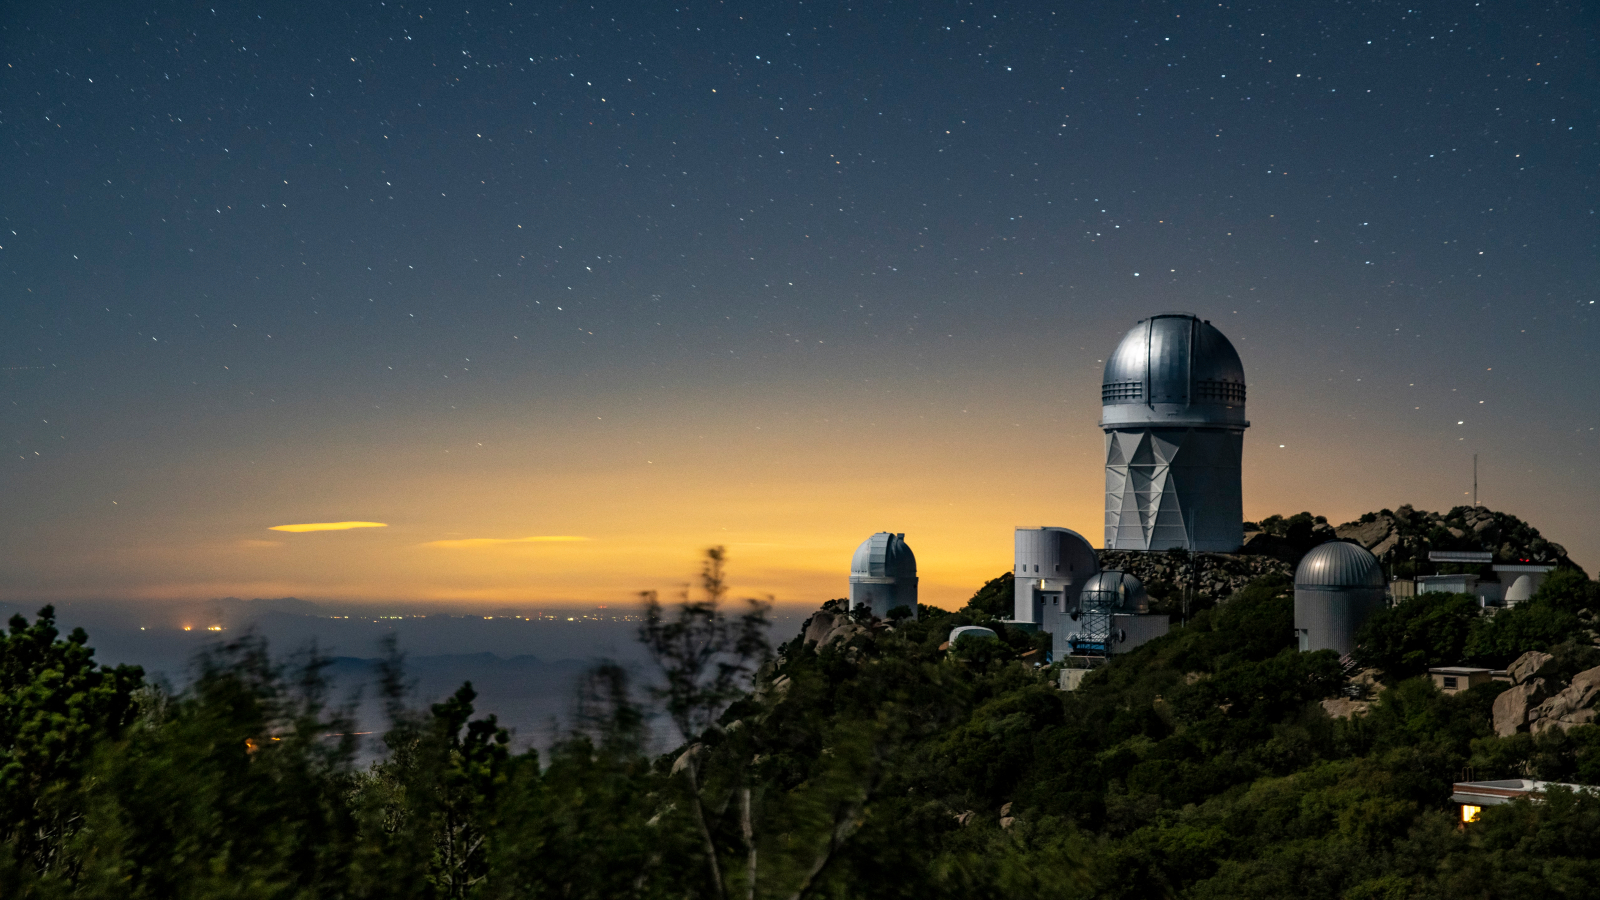 A view of the Mayall Telescope (tallest telescope at right), home of DESI, at Kitt Peak National Observatory near Tucson, Arizona. Credit: Marilyn Chung/Berkeley Lab